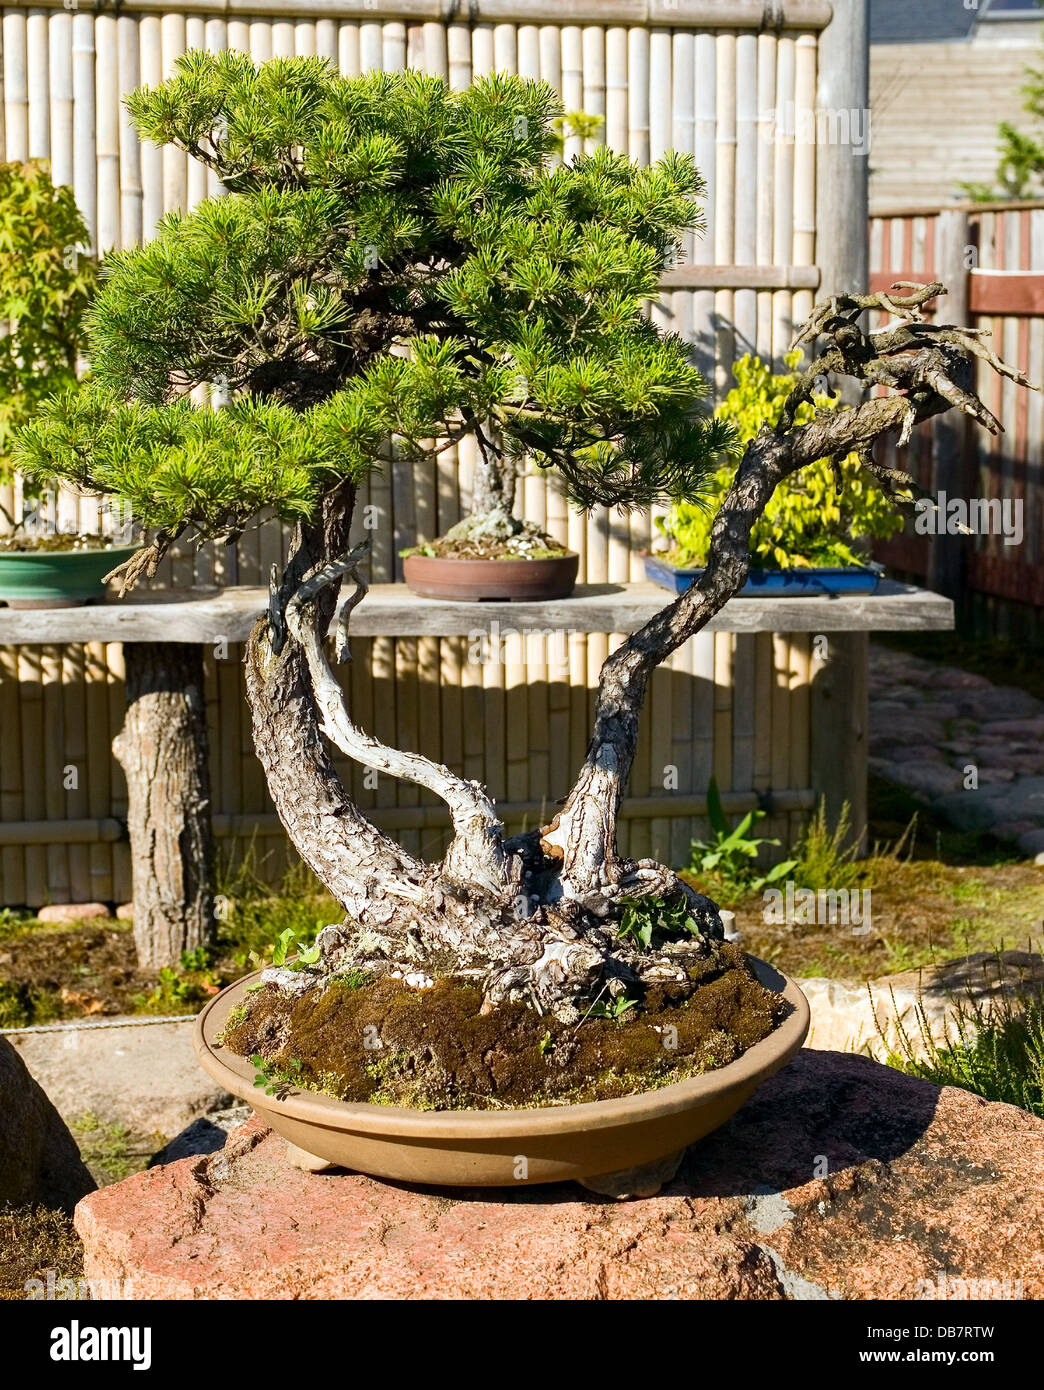 Bonsai in the pot is placed on garden of japanese Stock Photo